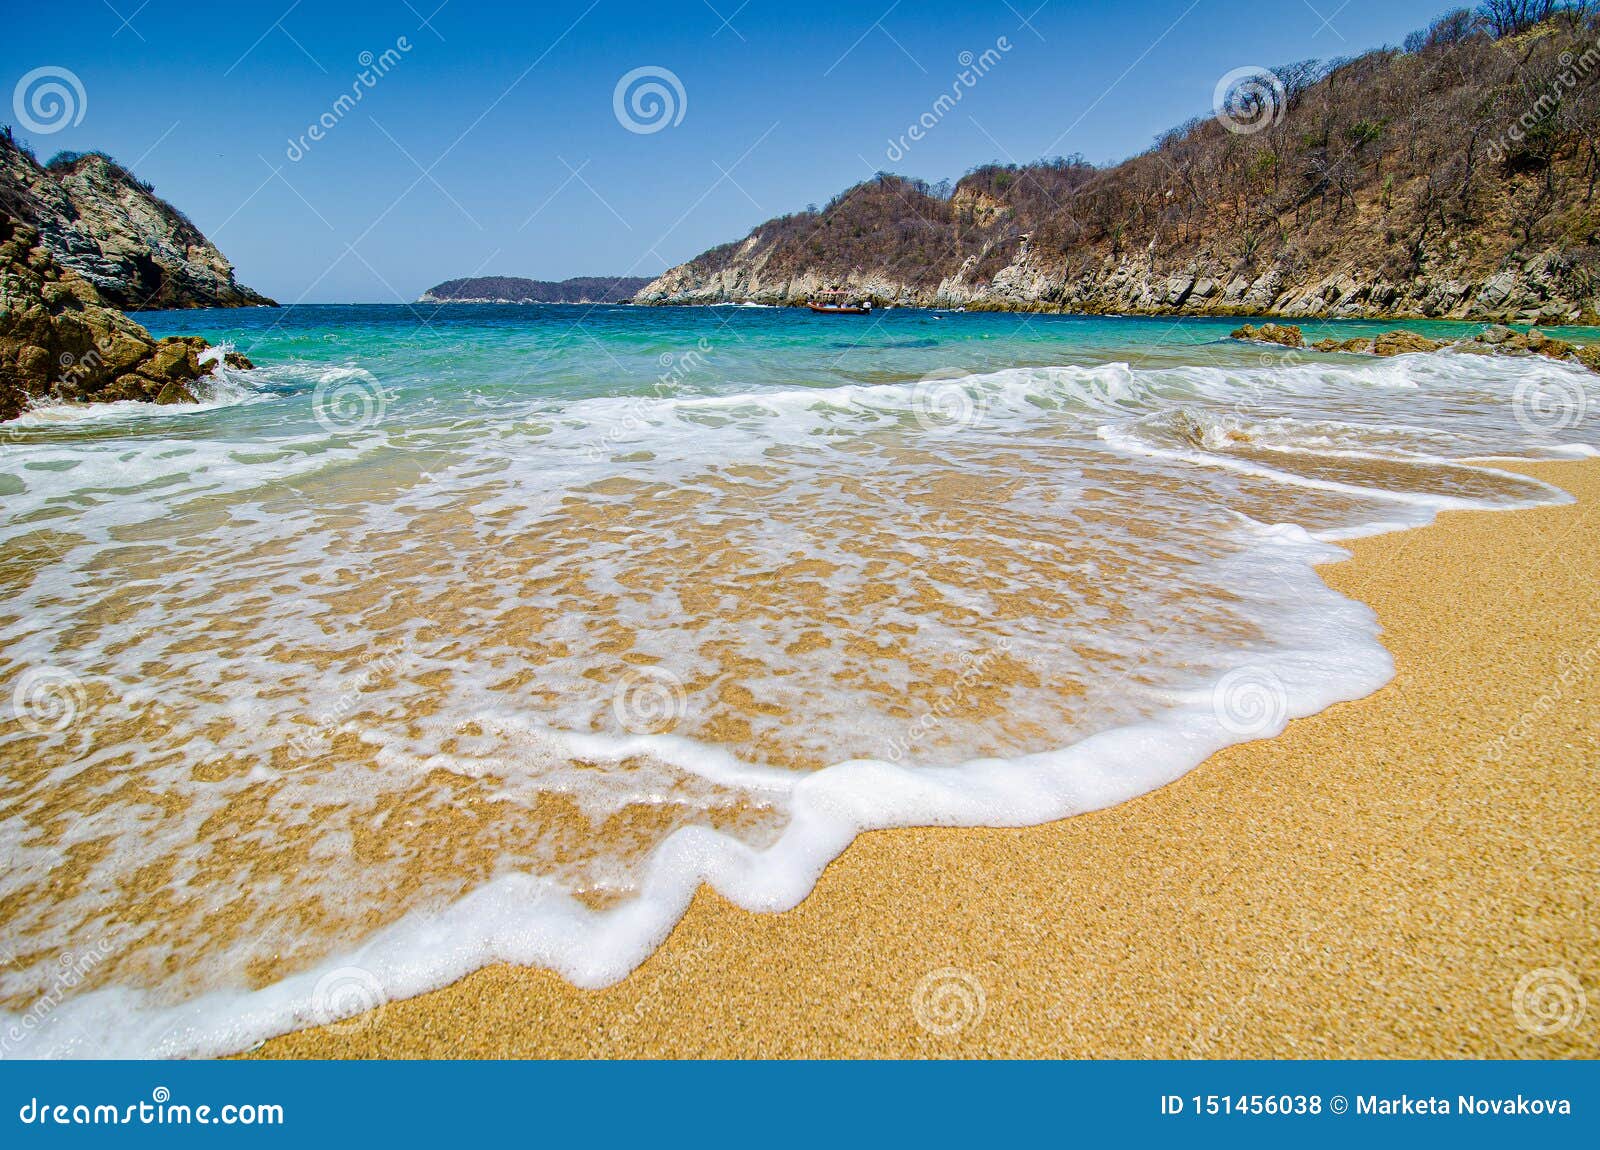 moden Ydmyghed skøn Paradise Sand Beach with Turquoise Blue Water in Huatulco, Oaxaca, Mexico  Stock Photo - Image of vacation, travel: 151456038